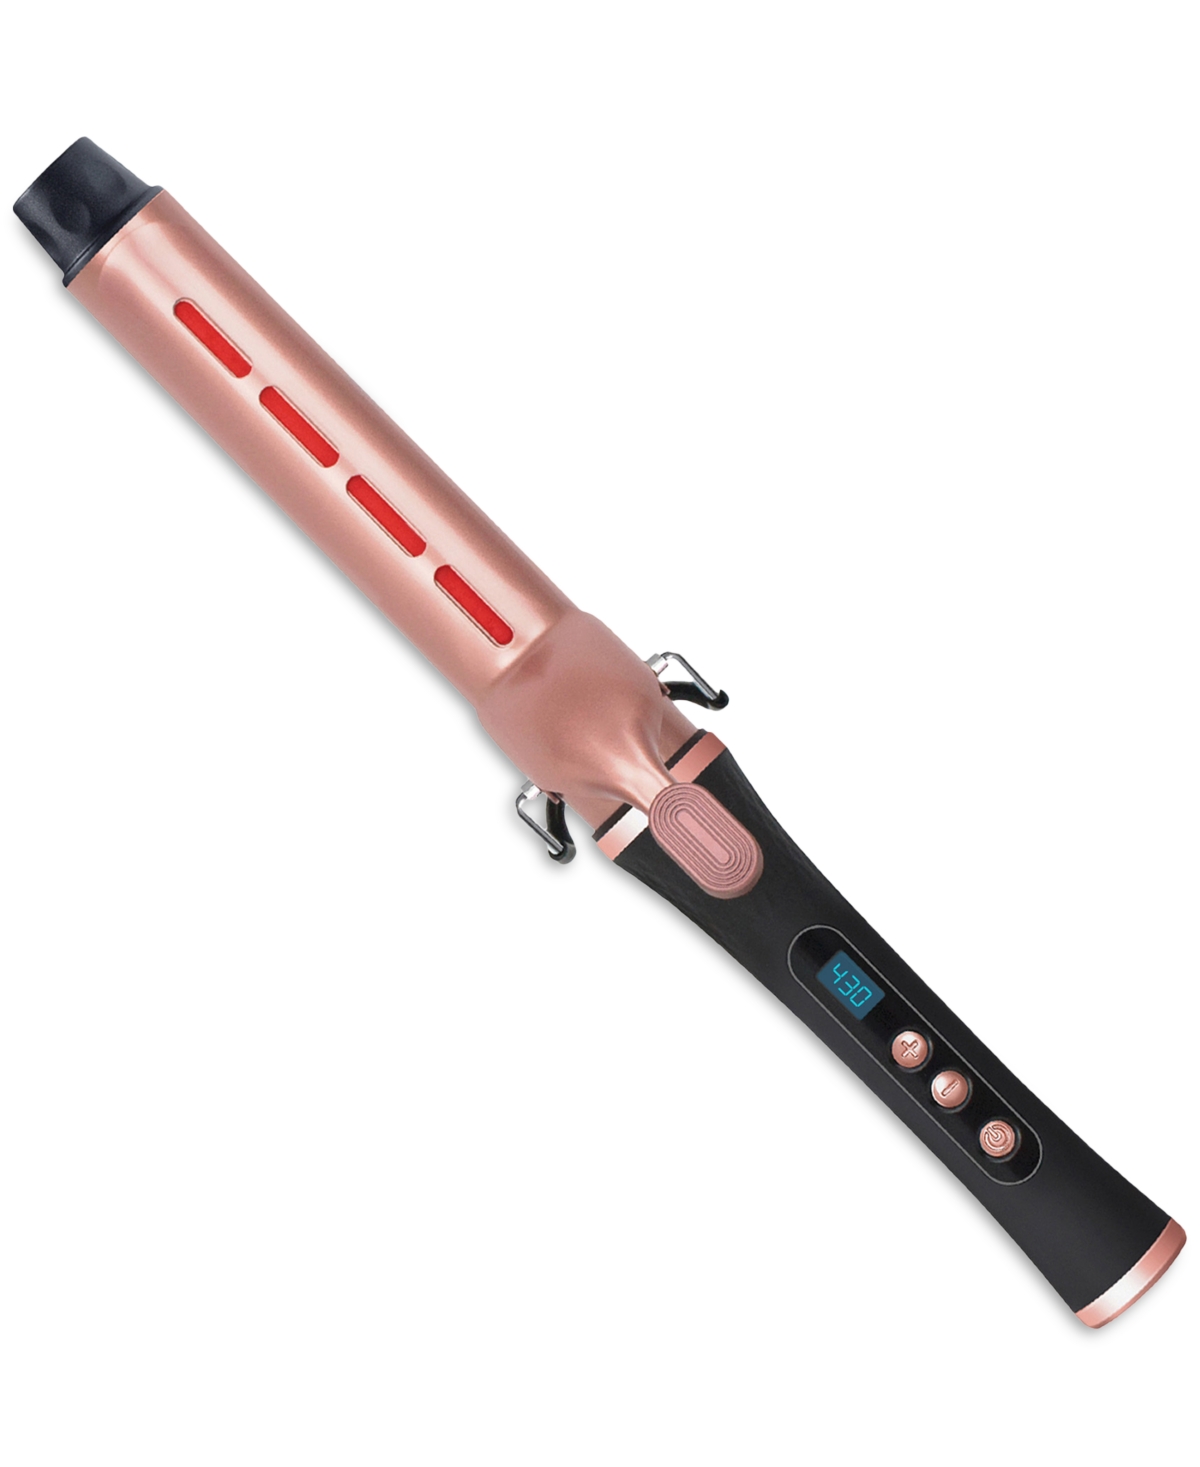 IR2 Infrared Curling Iron - 35 mm - Black And Rose Gold